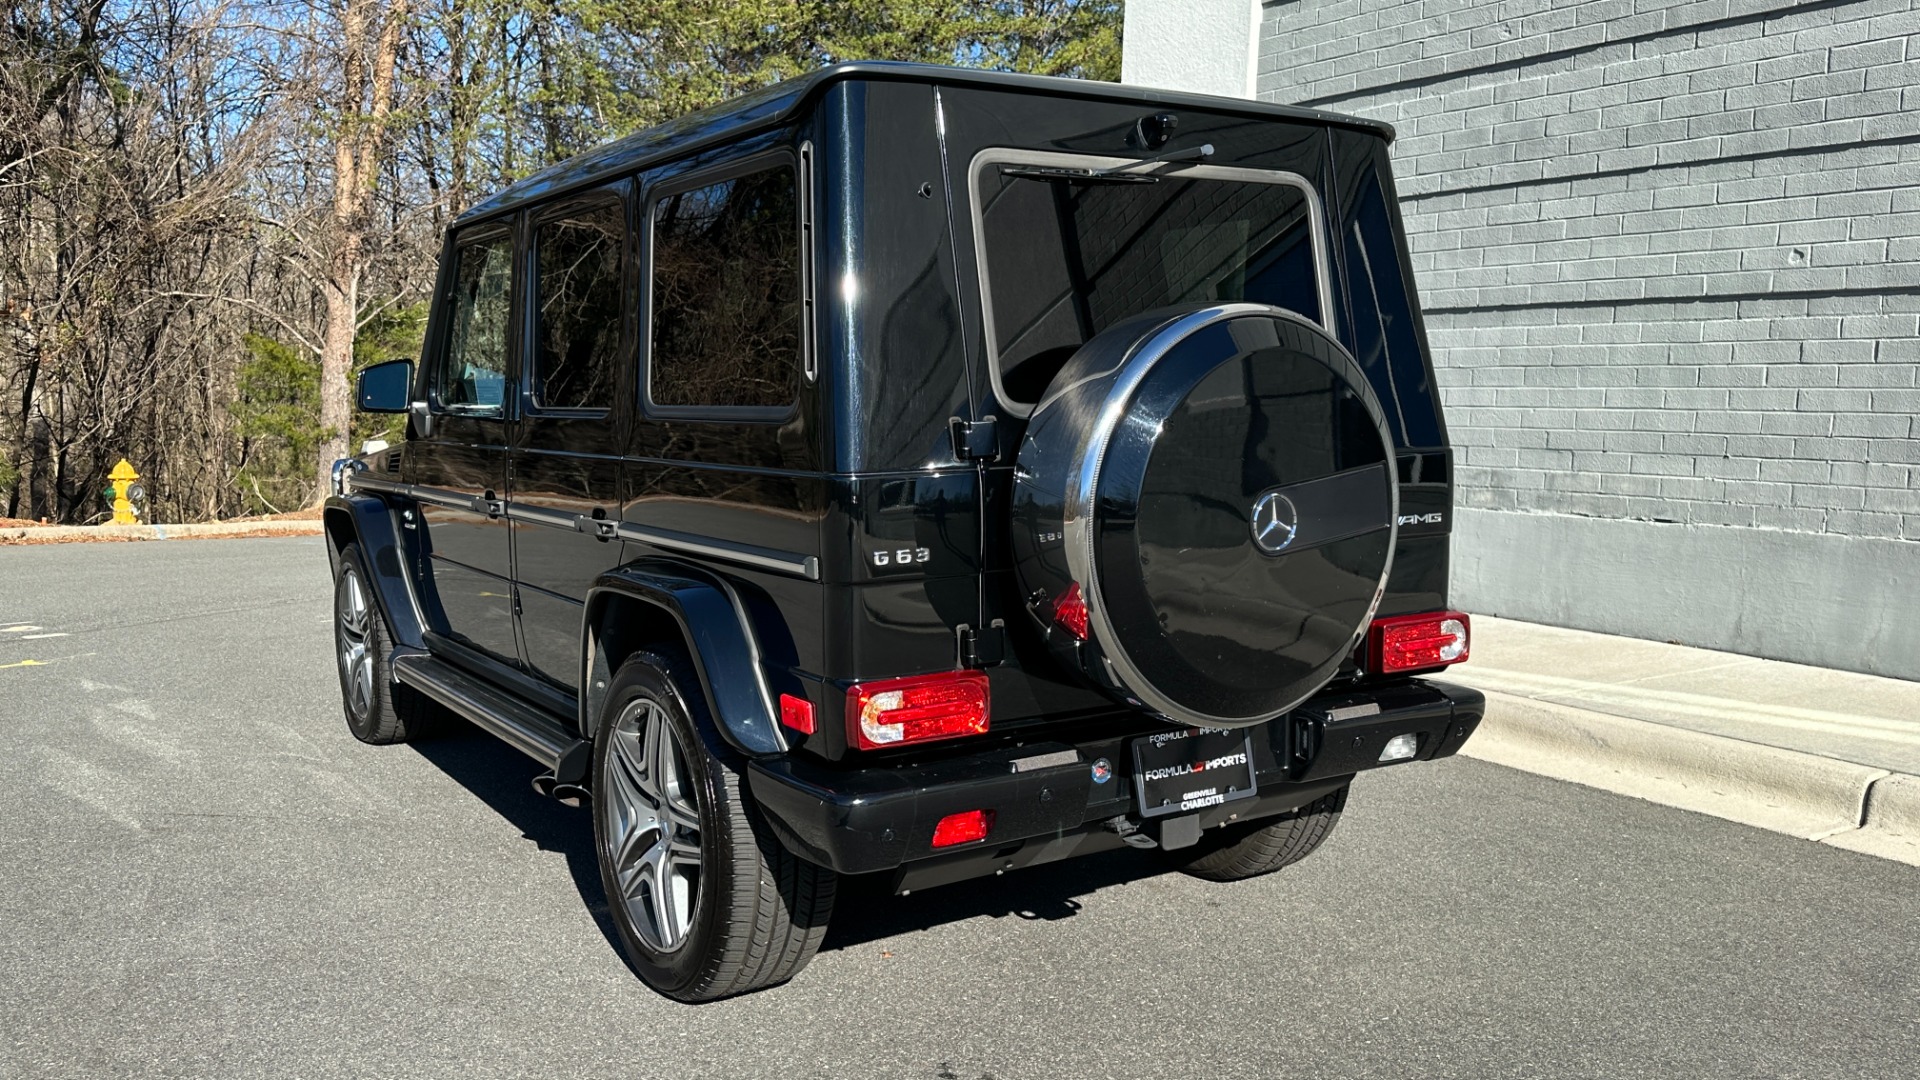 Used 2013 Mercedes-Benz G-Class G63 AMG / DESIGNO INTERIOR / DESIGNO TRIM / 20IN AMG WHEELS for sale $74,995 at Formula Imports in Charlotte NC 28227 4